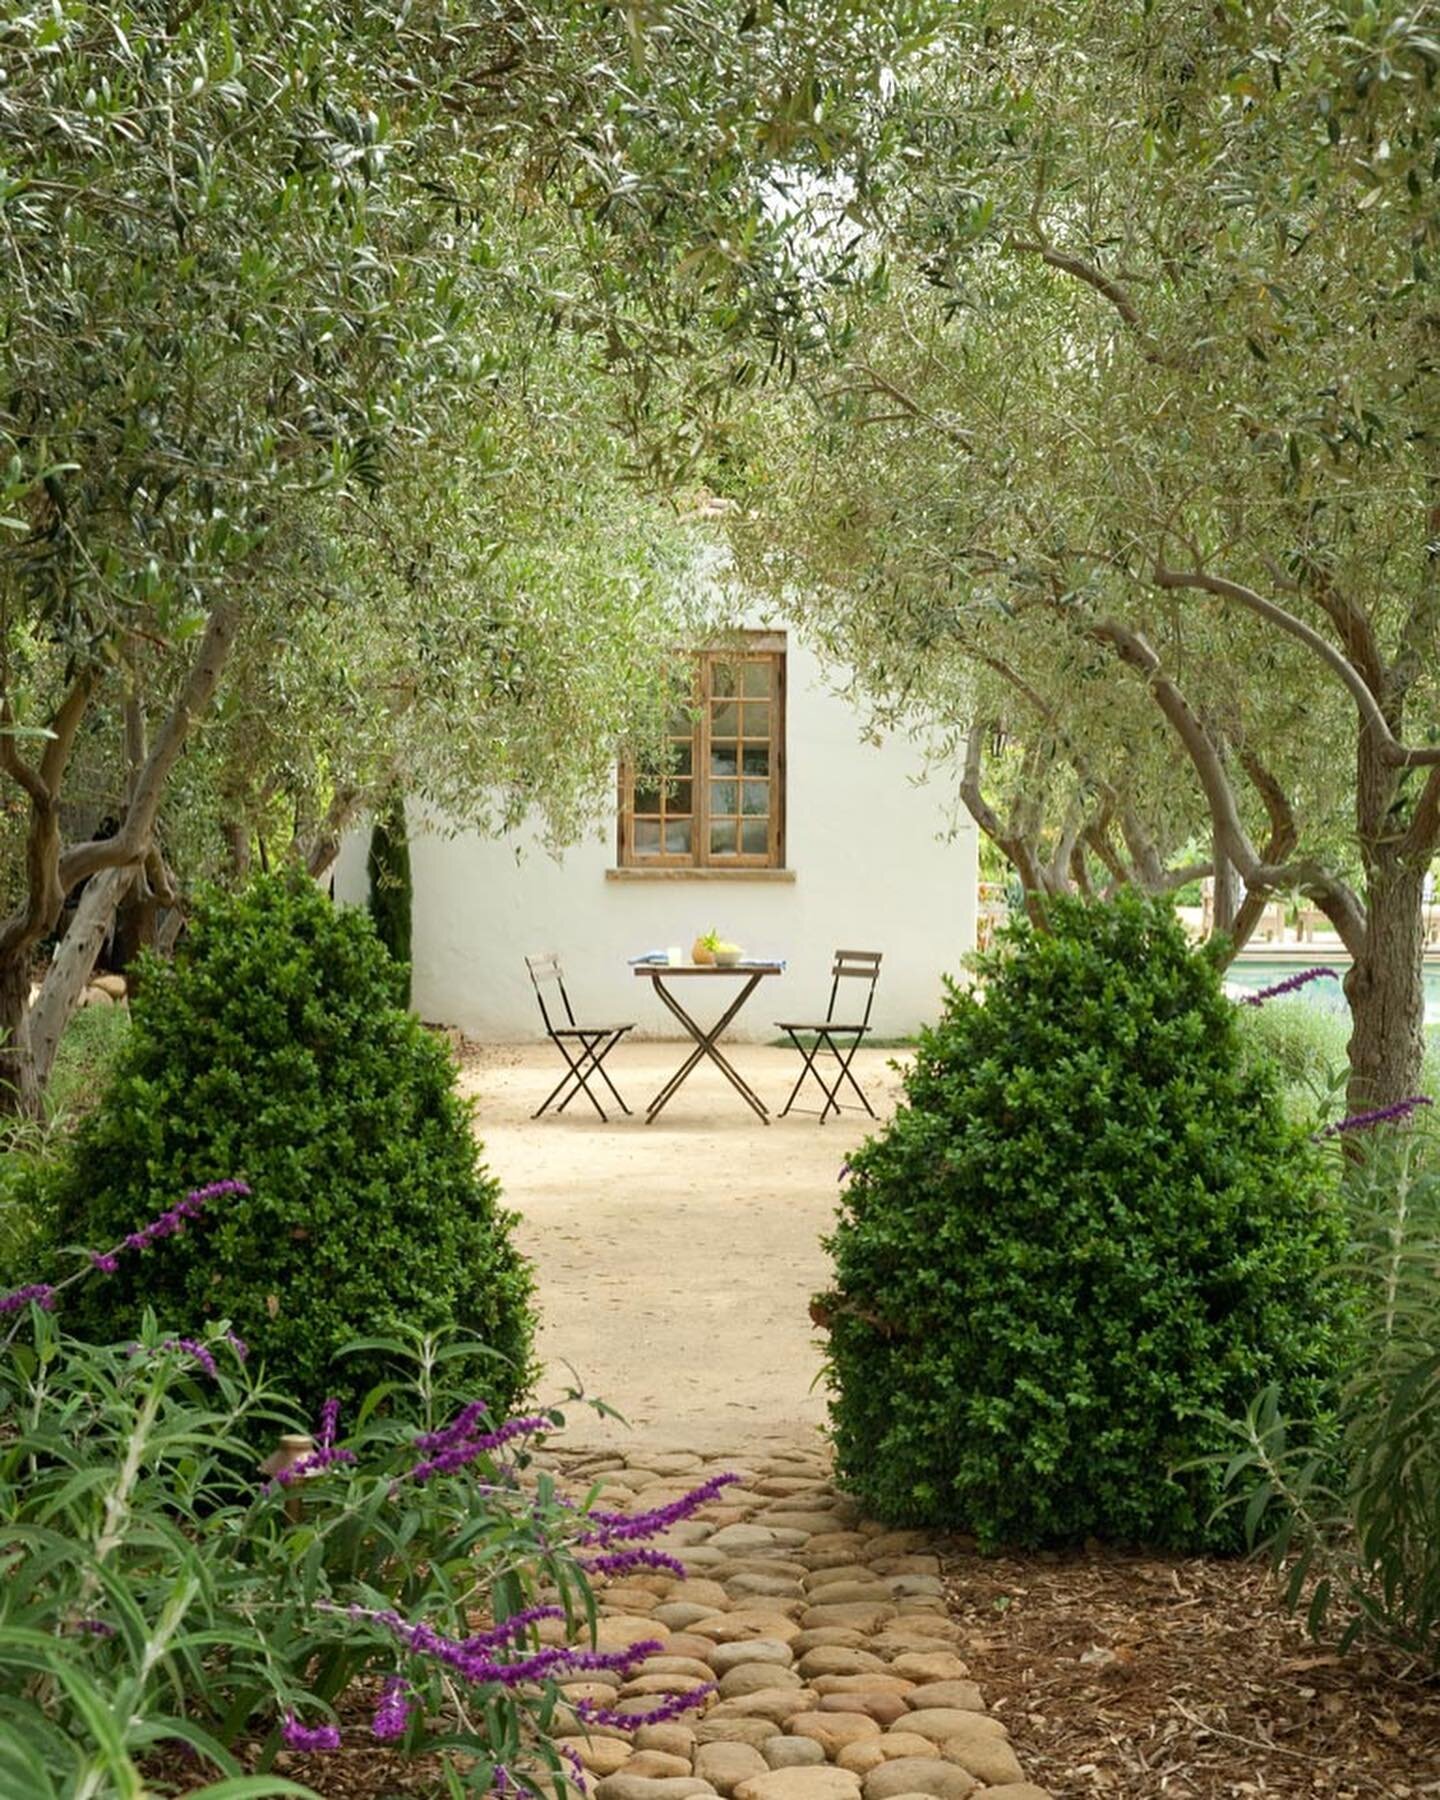 Imagine transporting yourself to Italy and enjoying a cafe in this Mediterranean garden surrounded by olive trees. 
&bull;
&bull;
&bull;
&bull;
&bull;

#landscapearchitecture #landscape #landscapedesign #architecture #gardendesign #garden #design #la